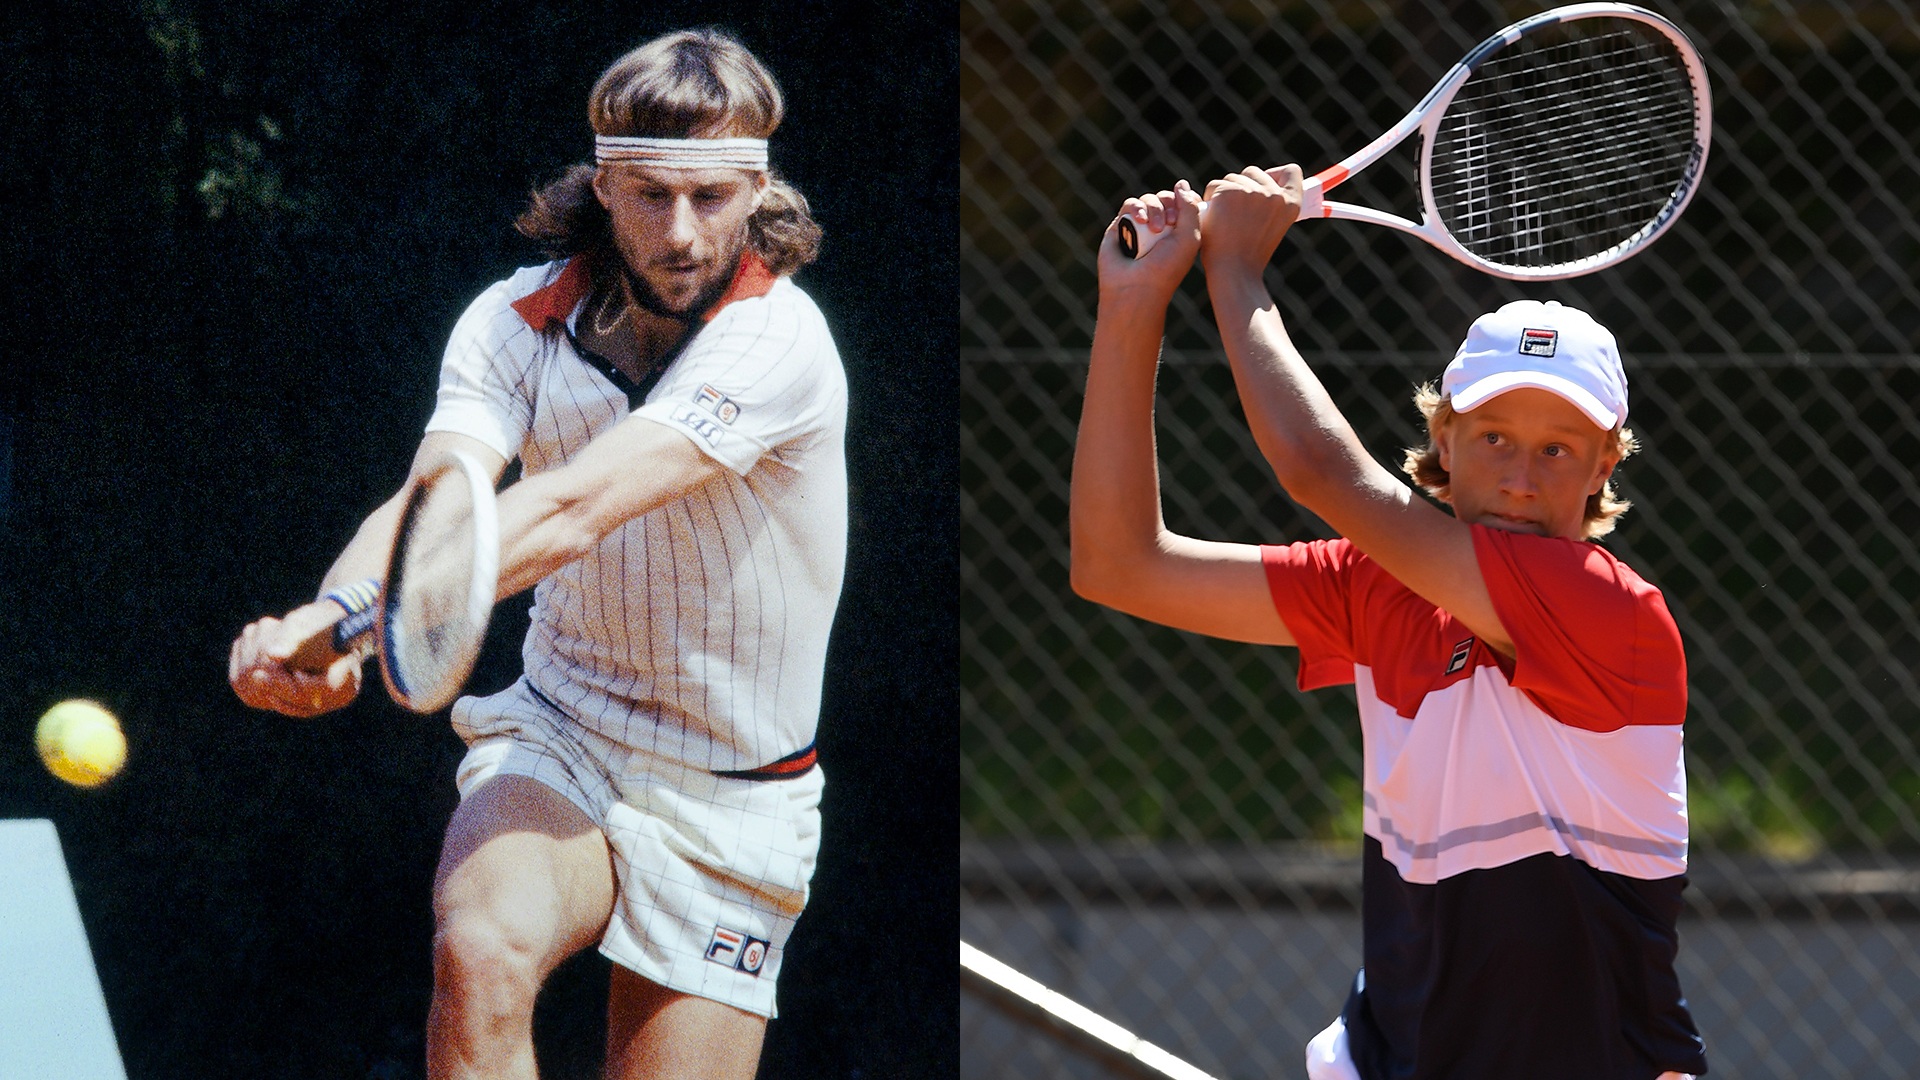 Forty-six years after his dads first Wimbledon, Leo Borg makes junior debut